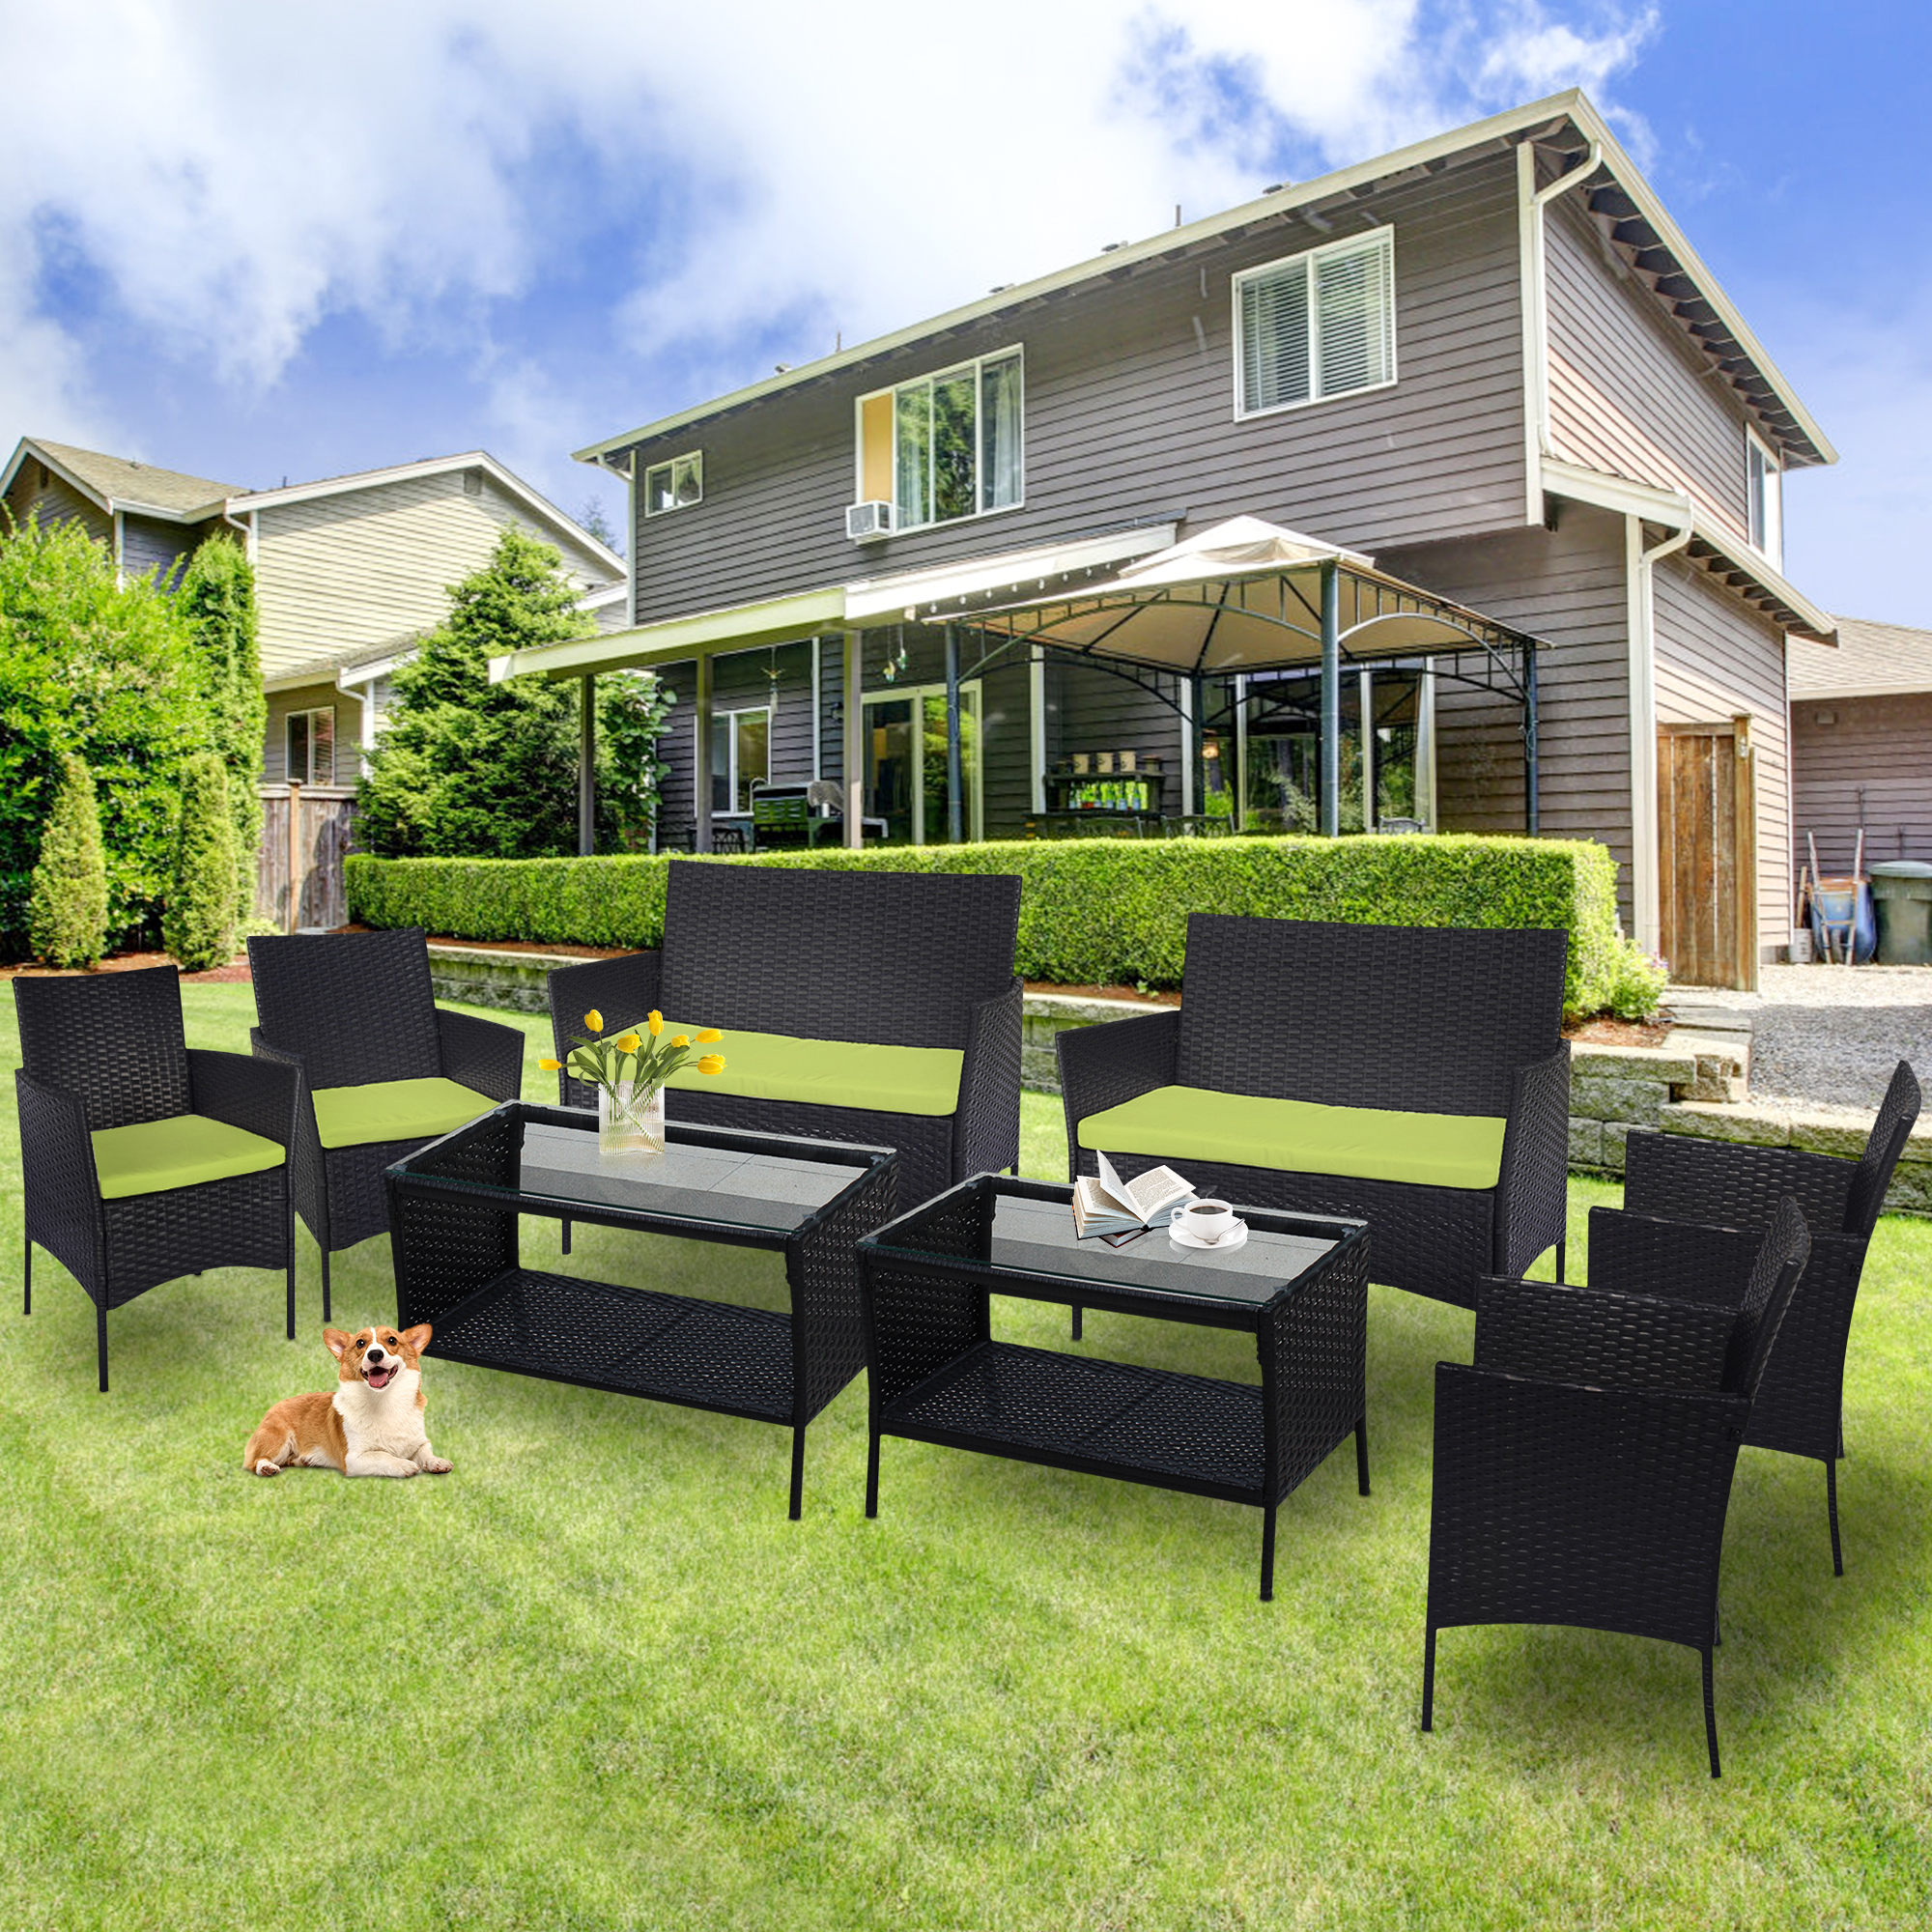 4-Piece Patio Outdoor Rattan Chair, Bistro Table Conversation Set, with Soft Cushion & Glass Table, Patio Rattan Conversation Furniture Set, Leisure Furniture Set for Garden Backyard Balcony, T194 - image 3 of 8